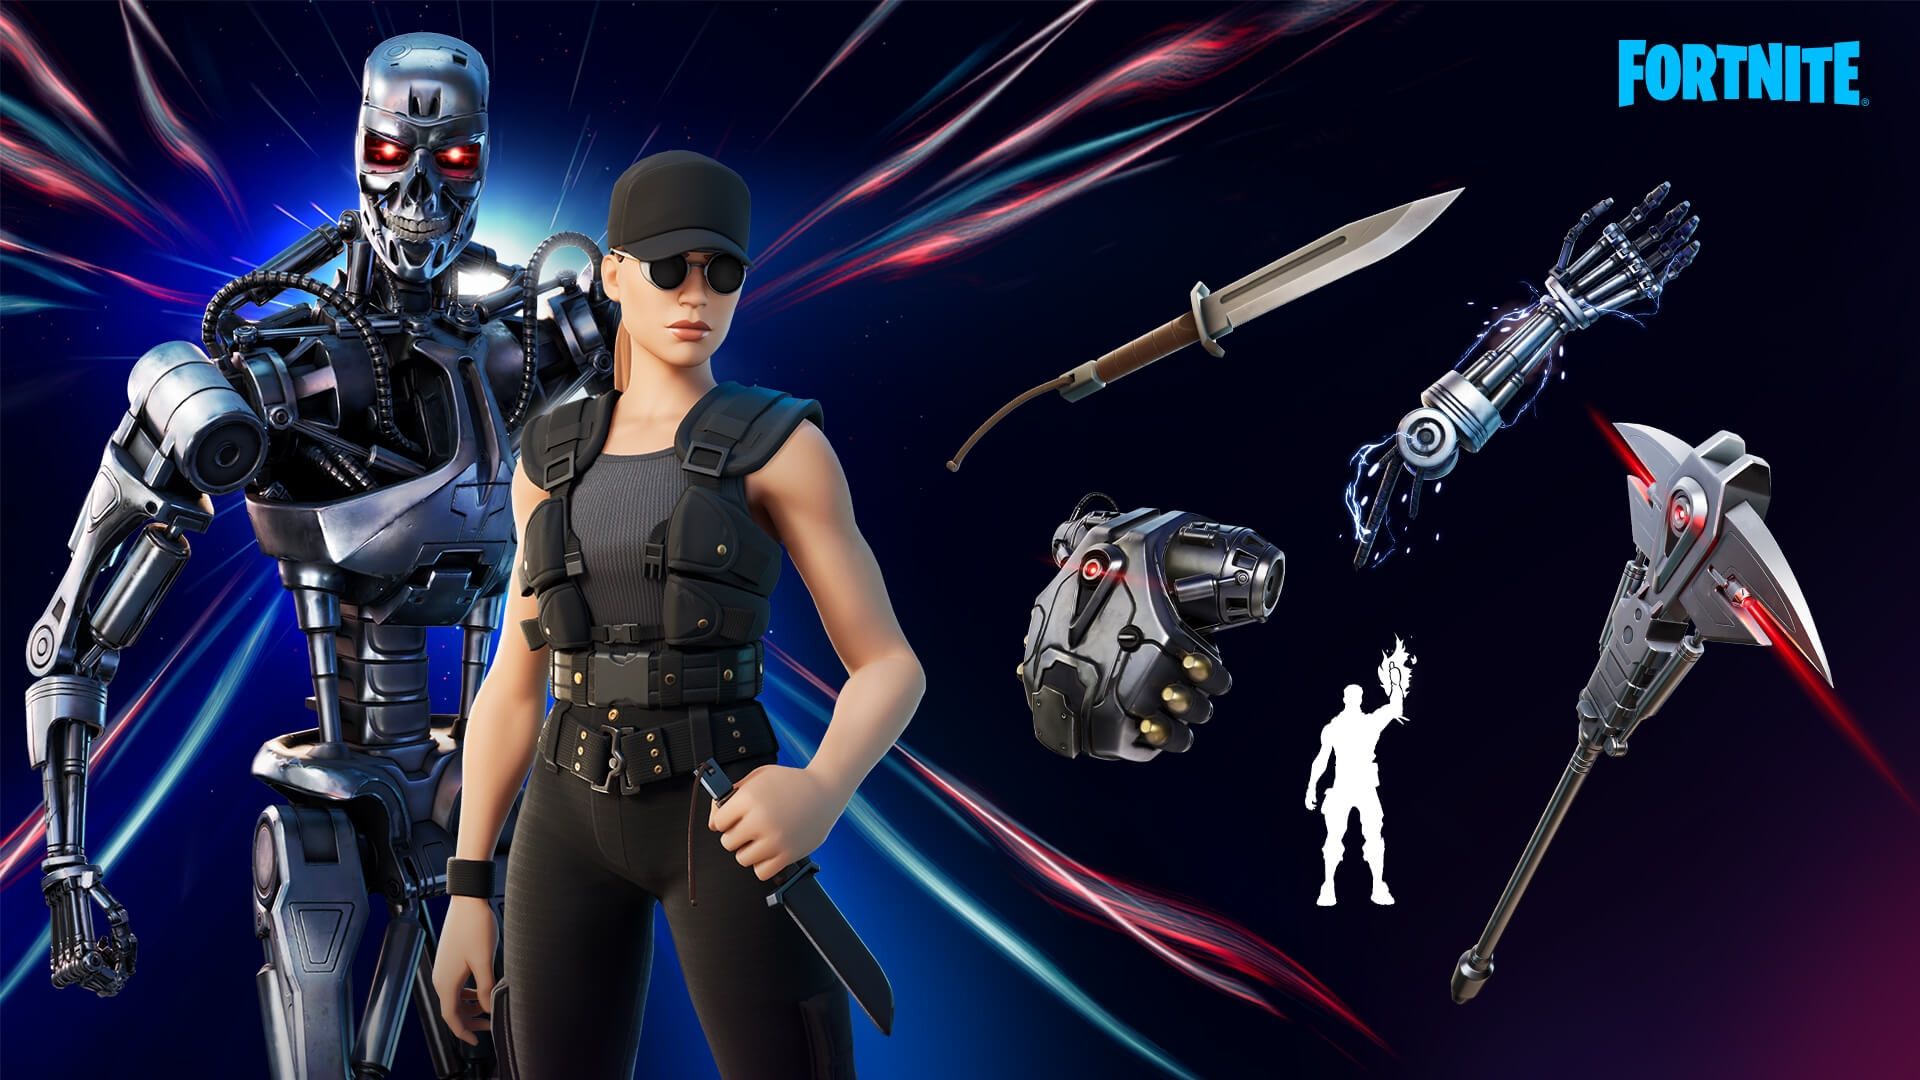 Fortnite Future War Set Includes Sarah Connor and T-800